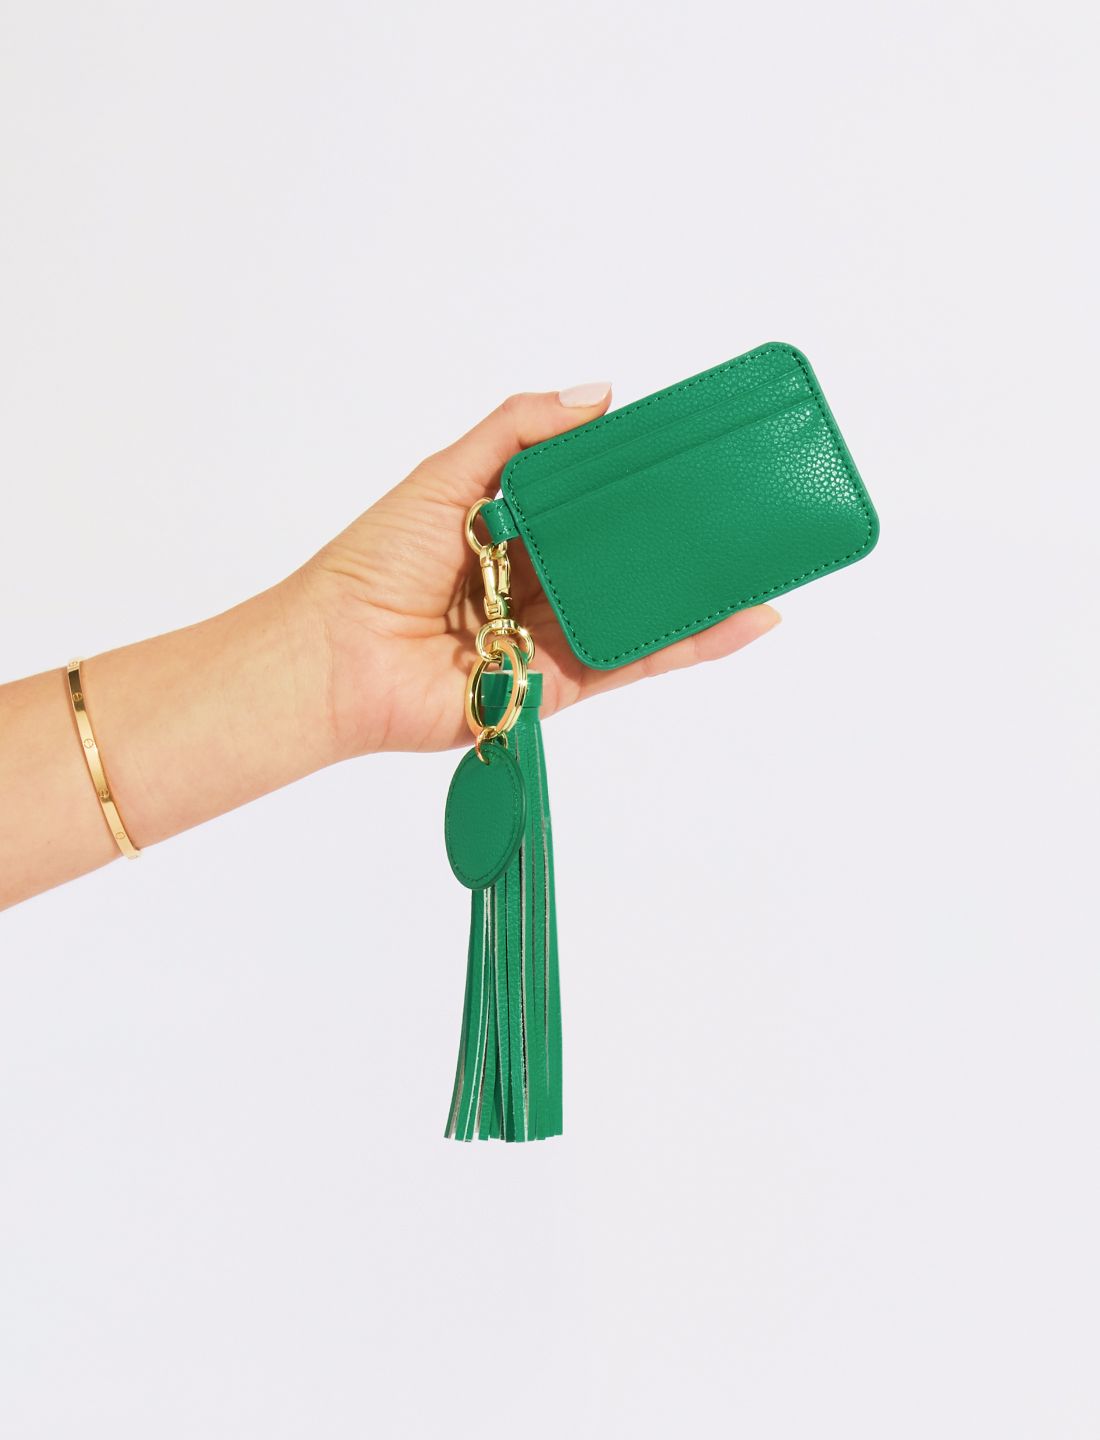 Hand holding an Emerald Green Leather Card Holder